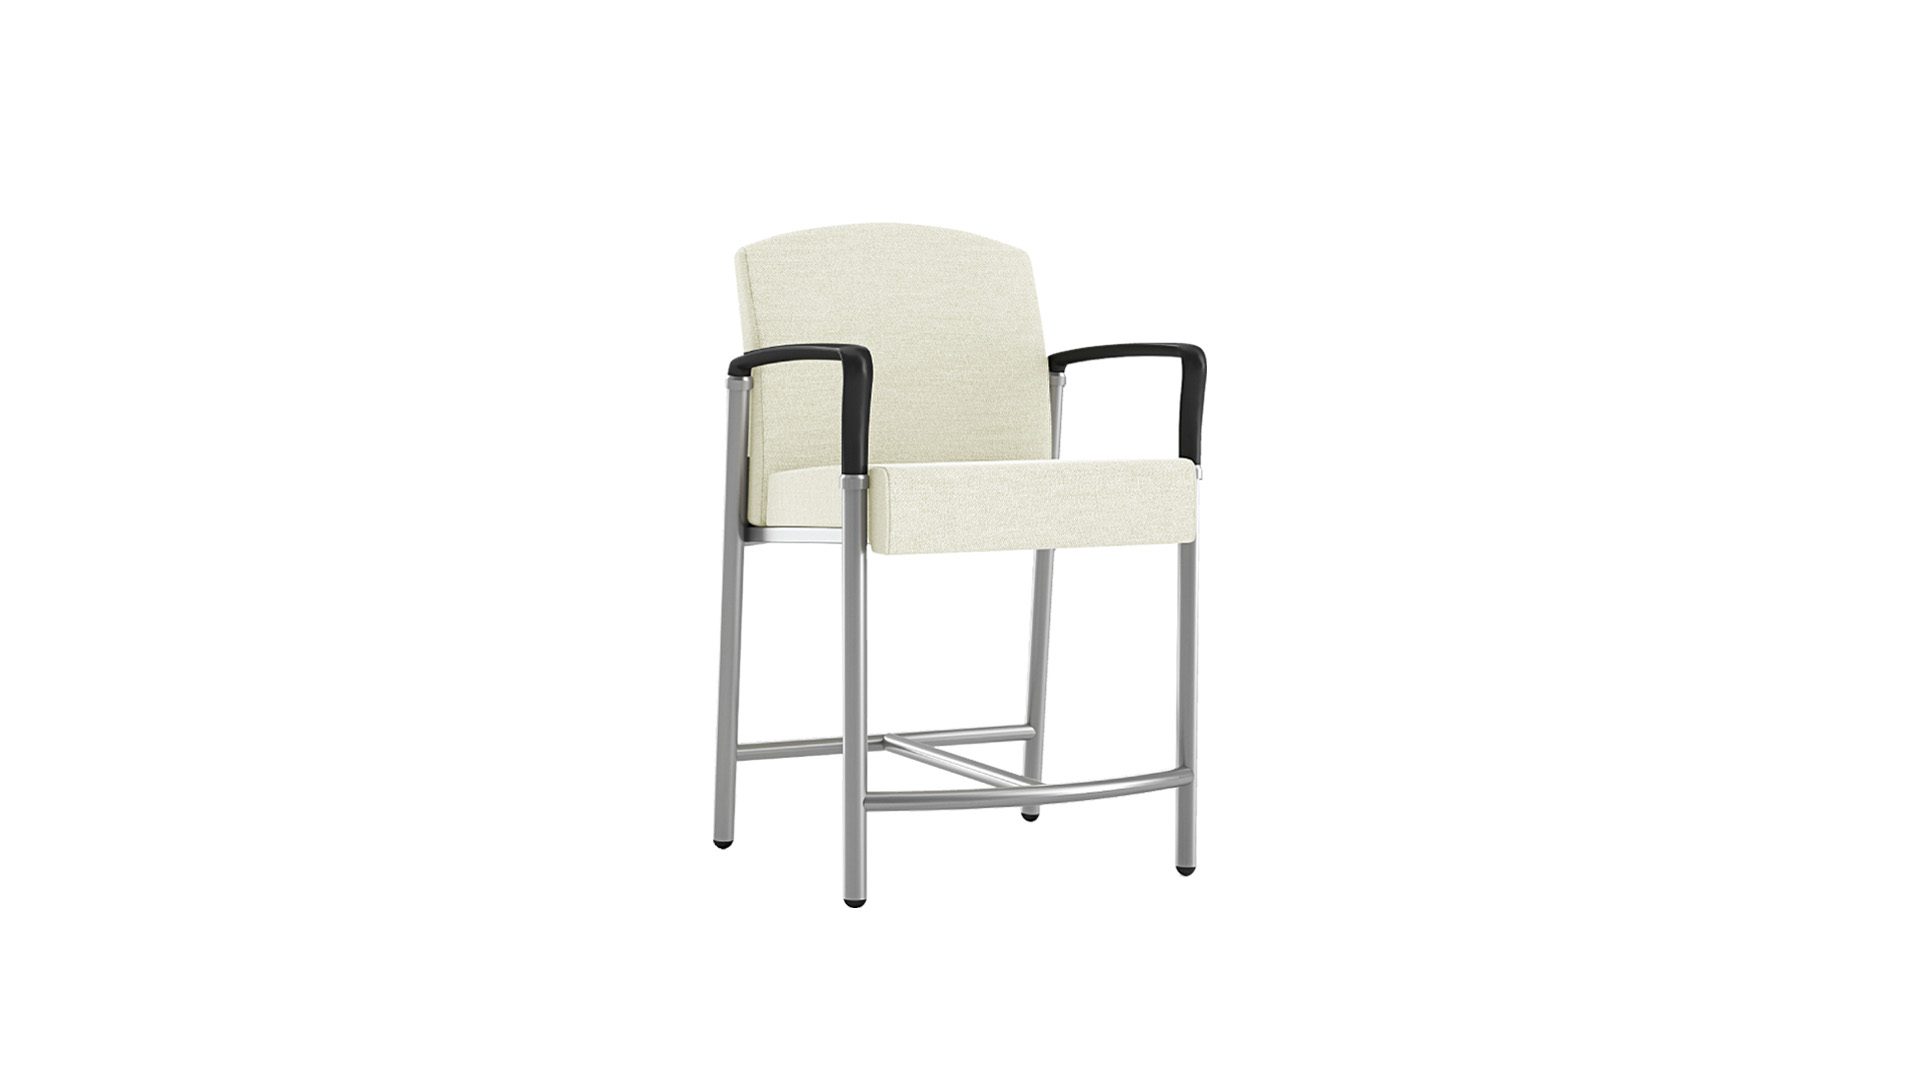 NTH130 Integrity Hip chair with 21" seat and arms